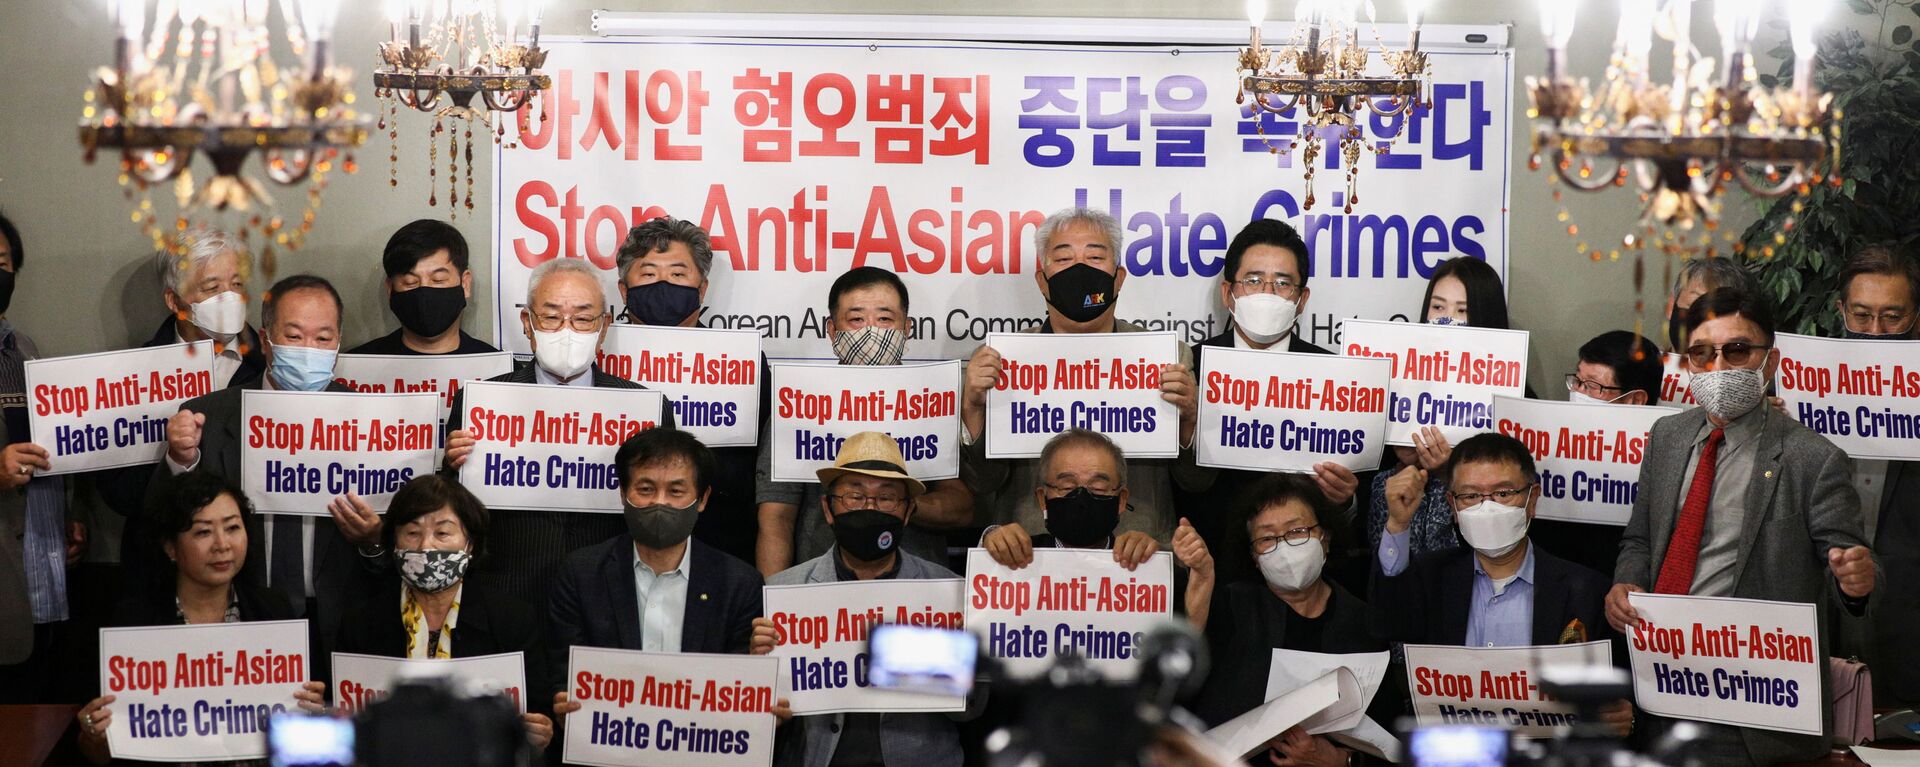 Members of the Atlanta Korean American Committee against Asian Hate Crime pose with placards during a group photo as they meet at Ching Dam, a Korean restaurant, after the fatal shooting at three Georgia spas, in Duluth, Georgia, U.S., 18 March 2021.  - Sputnik International, 1920, 25.10.2021